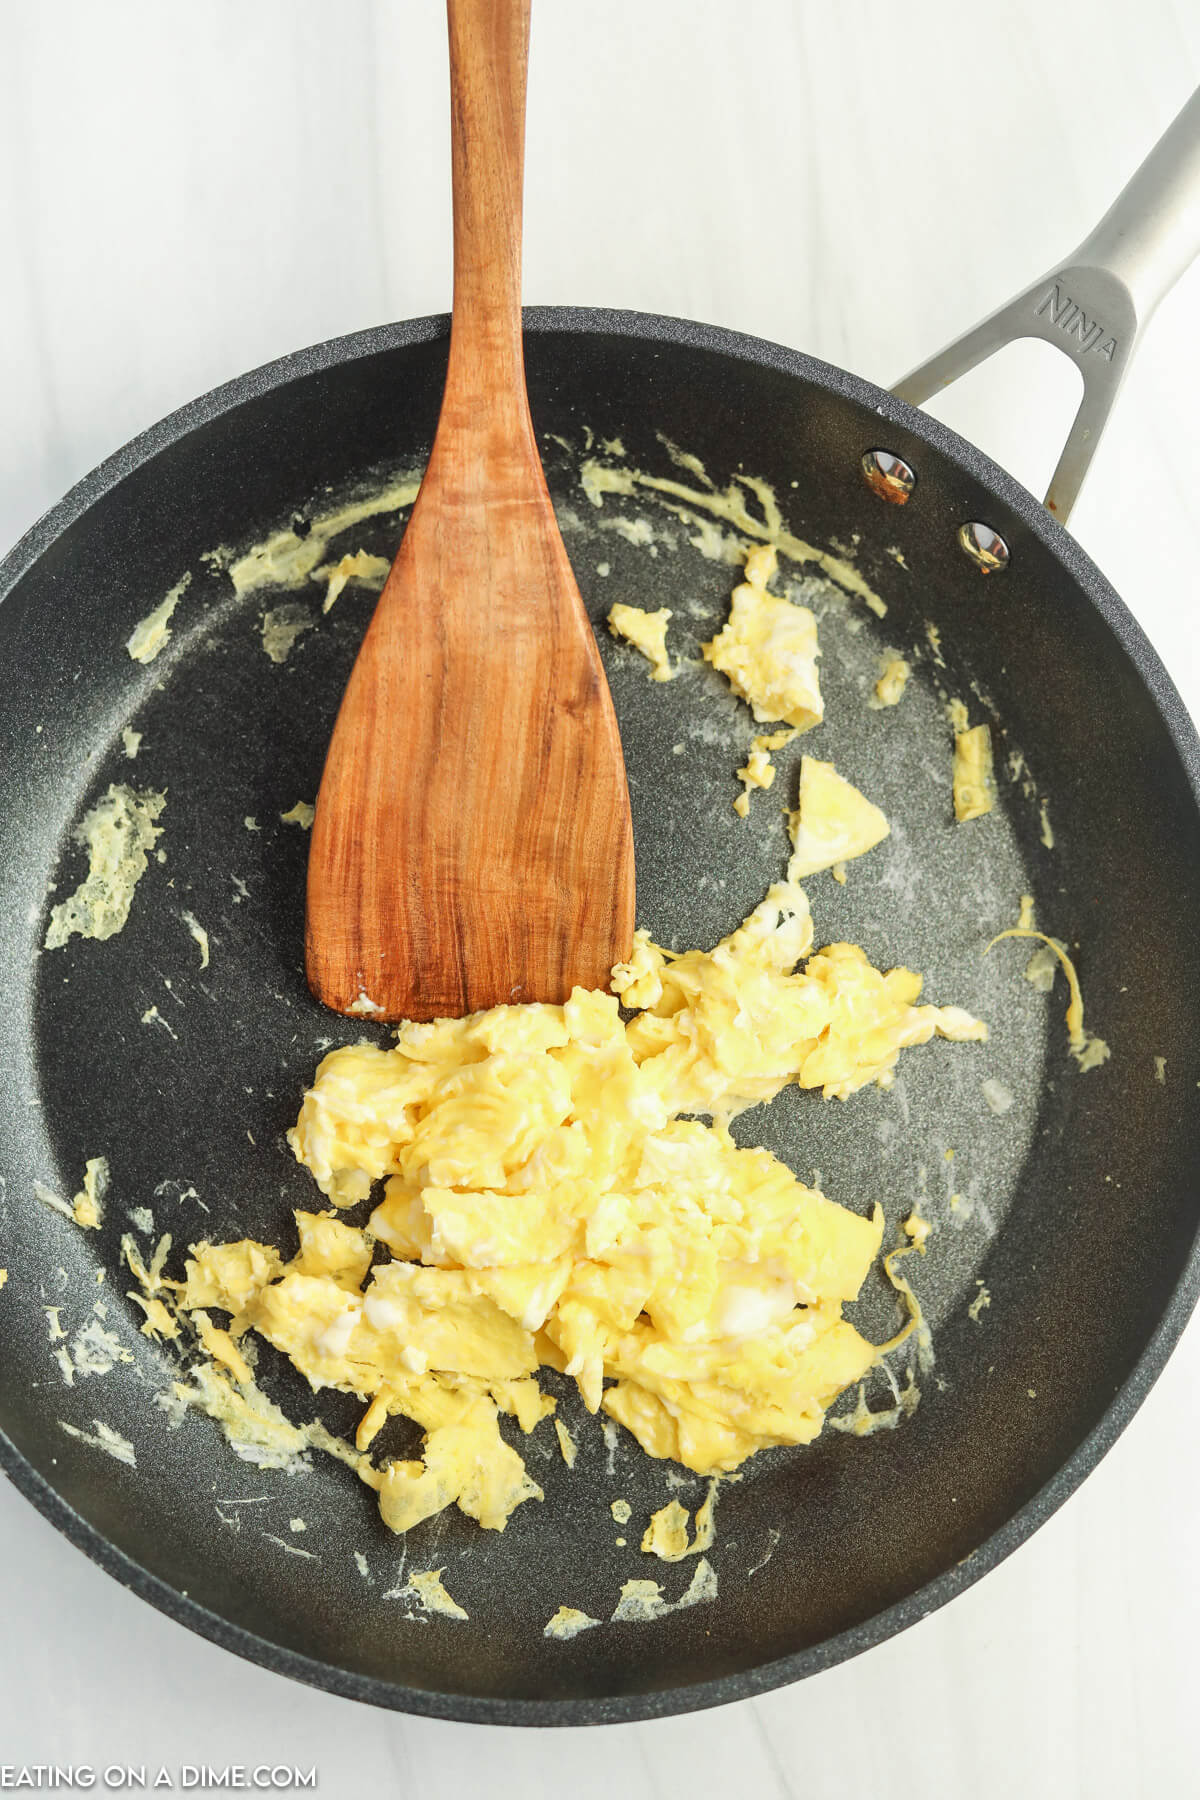 Cooking the eggs in a skillet with a wooden spoon